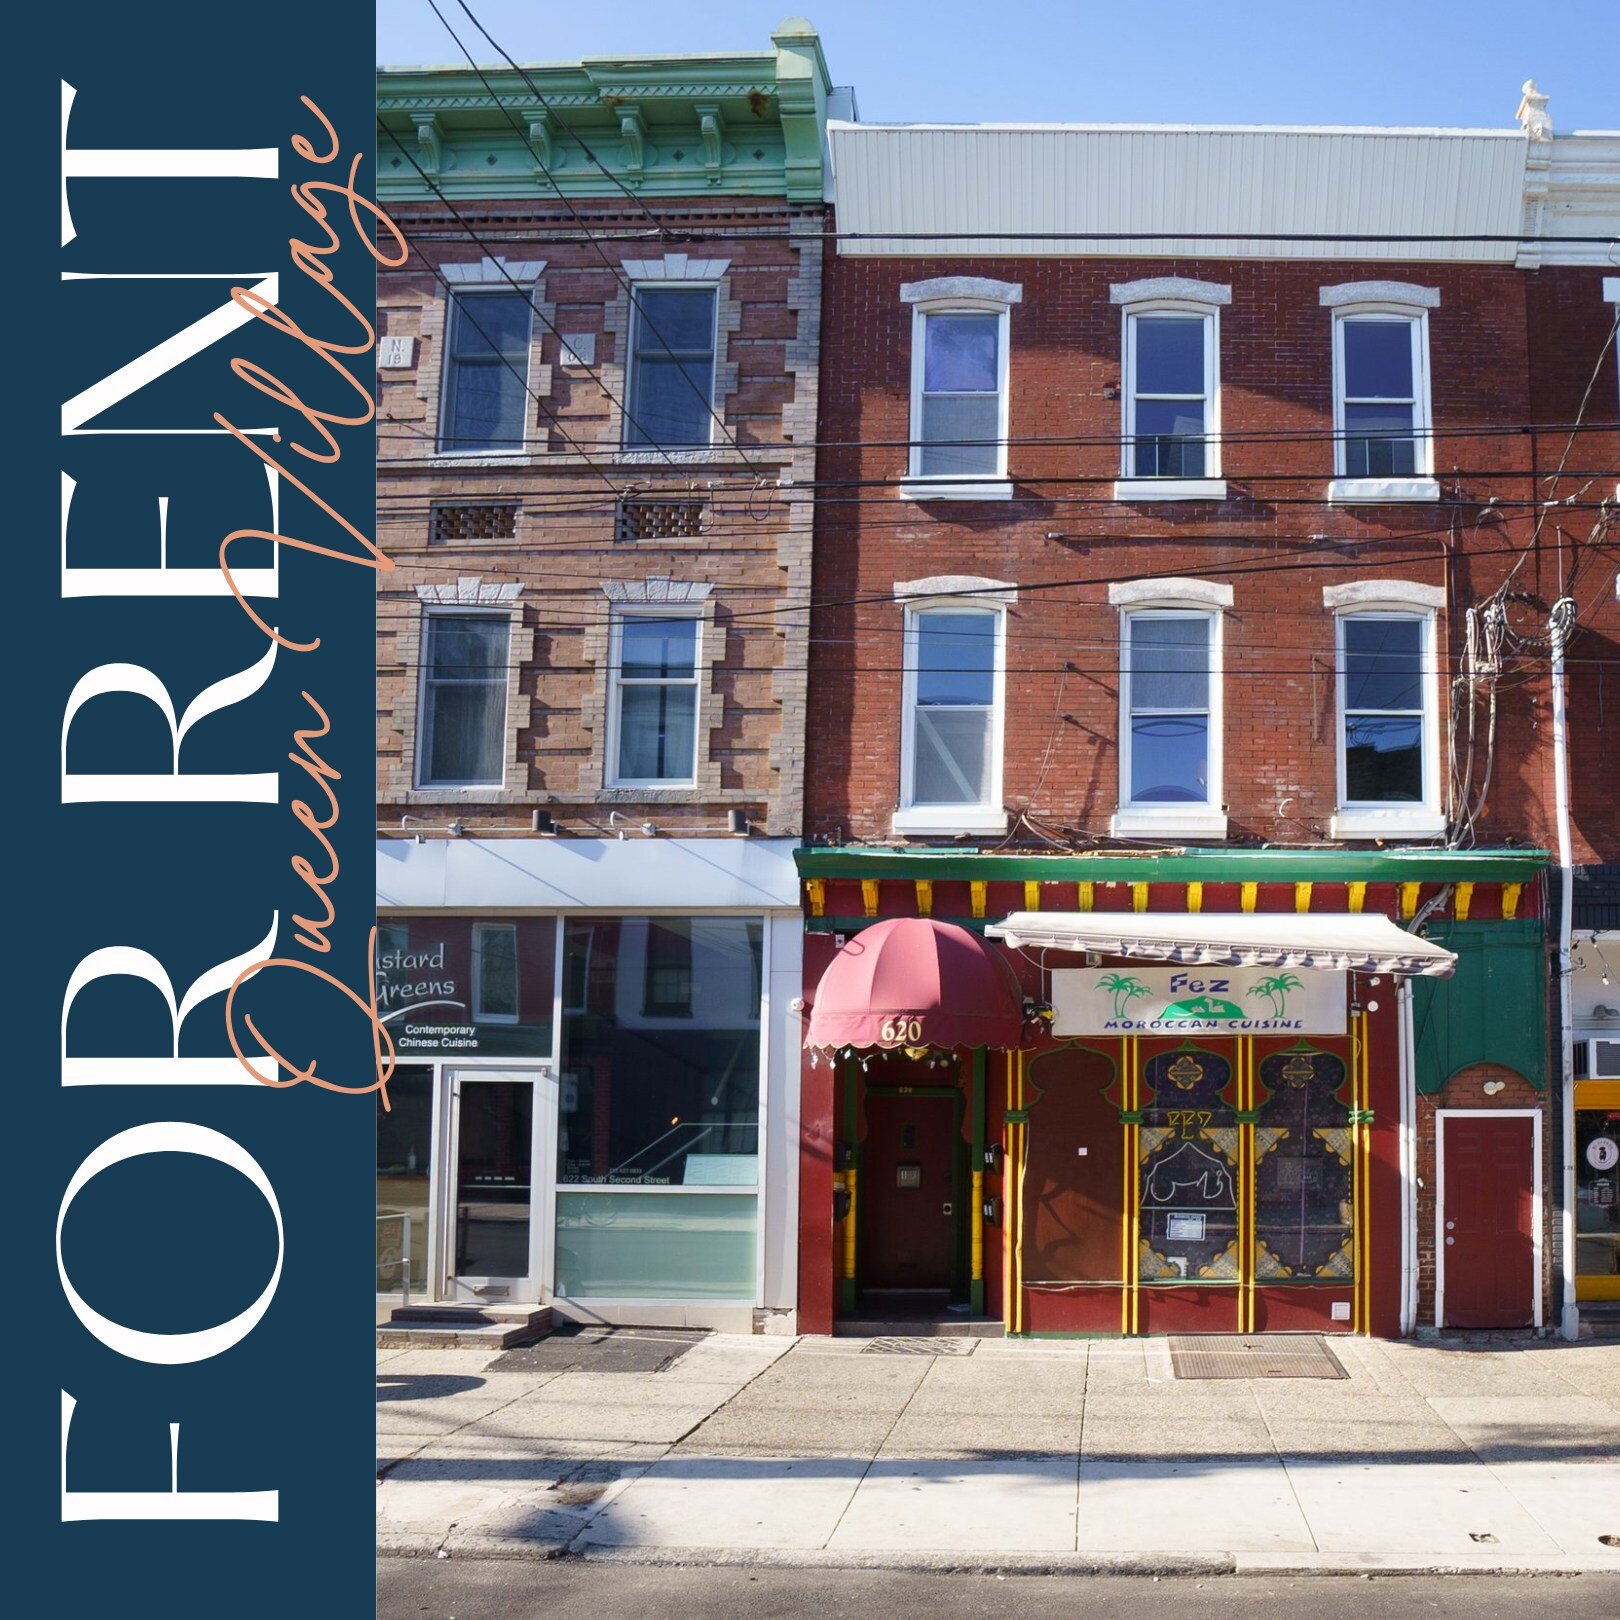 NEW PRICE! ✨🏷

Available for rent! This charming two-bedroom is just a stones throw away from the vibrant Headhouse Square! This second floor unit boasts hardwood floors, character, ample space, and a flexible layout. 

📍Nestled just off South Stre